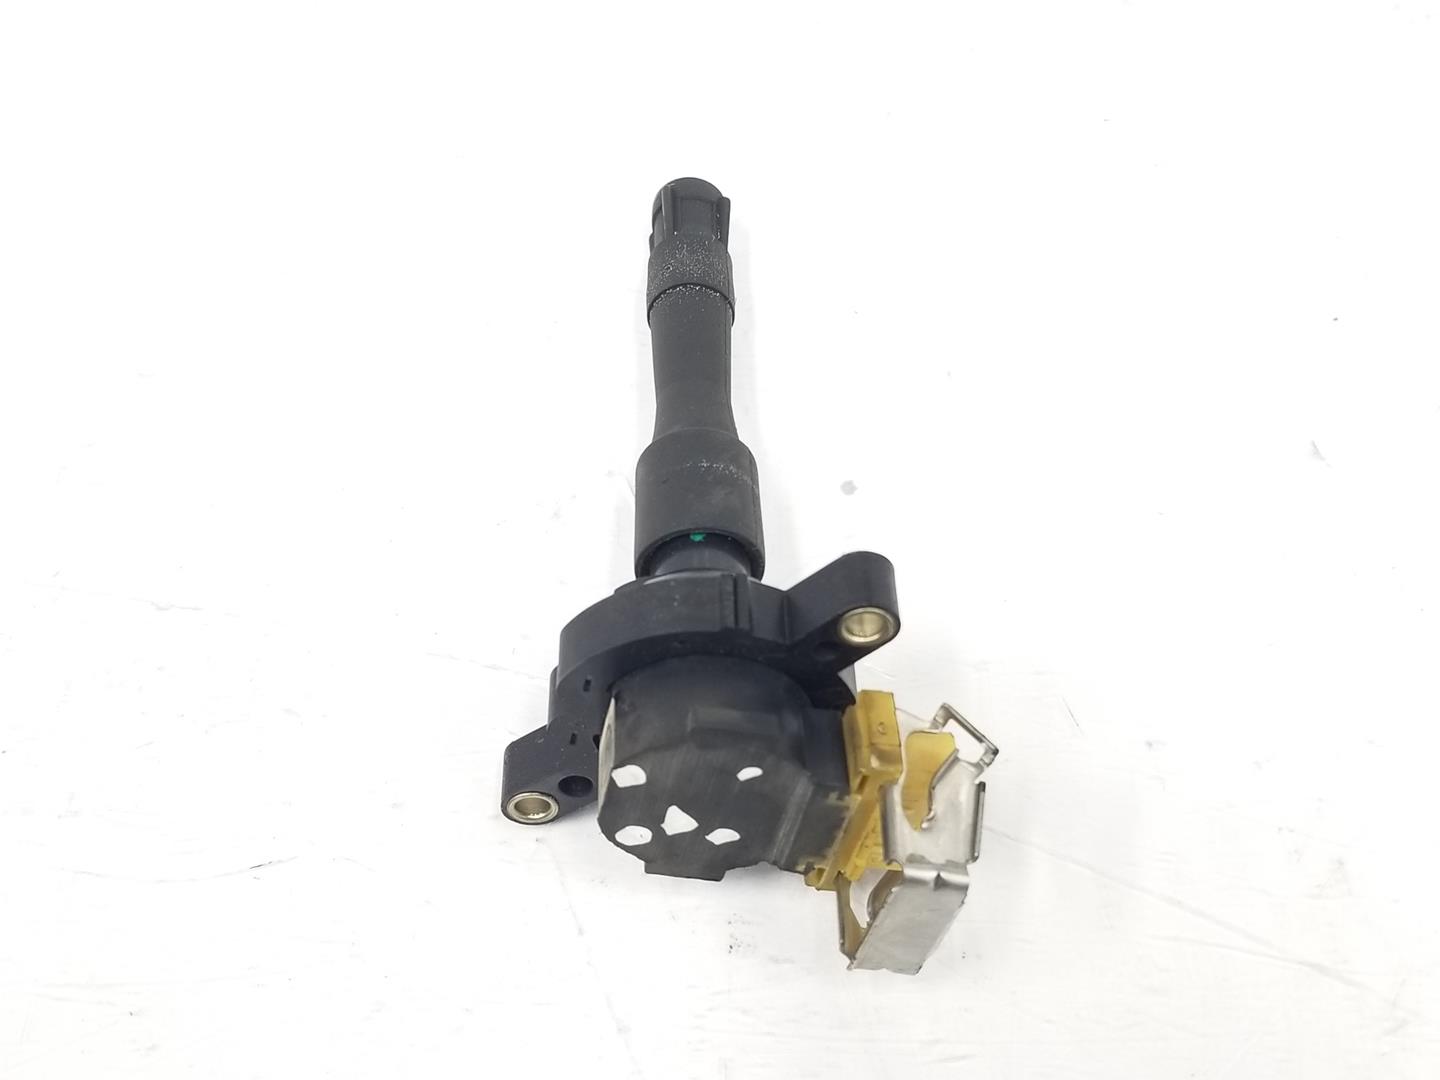 BMW 3 Series E46 (1997-2006) High Voltage Ignition Coil 1748017, 12131748017 19779880